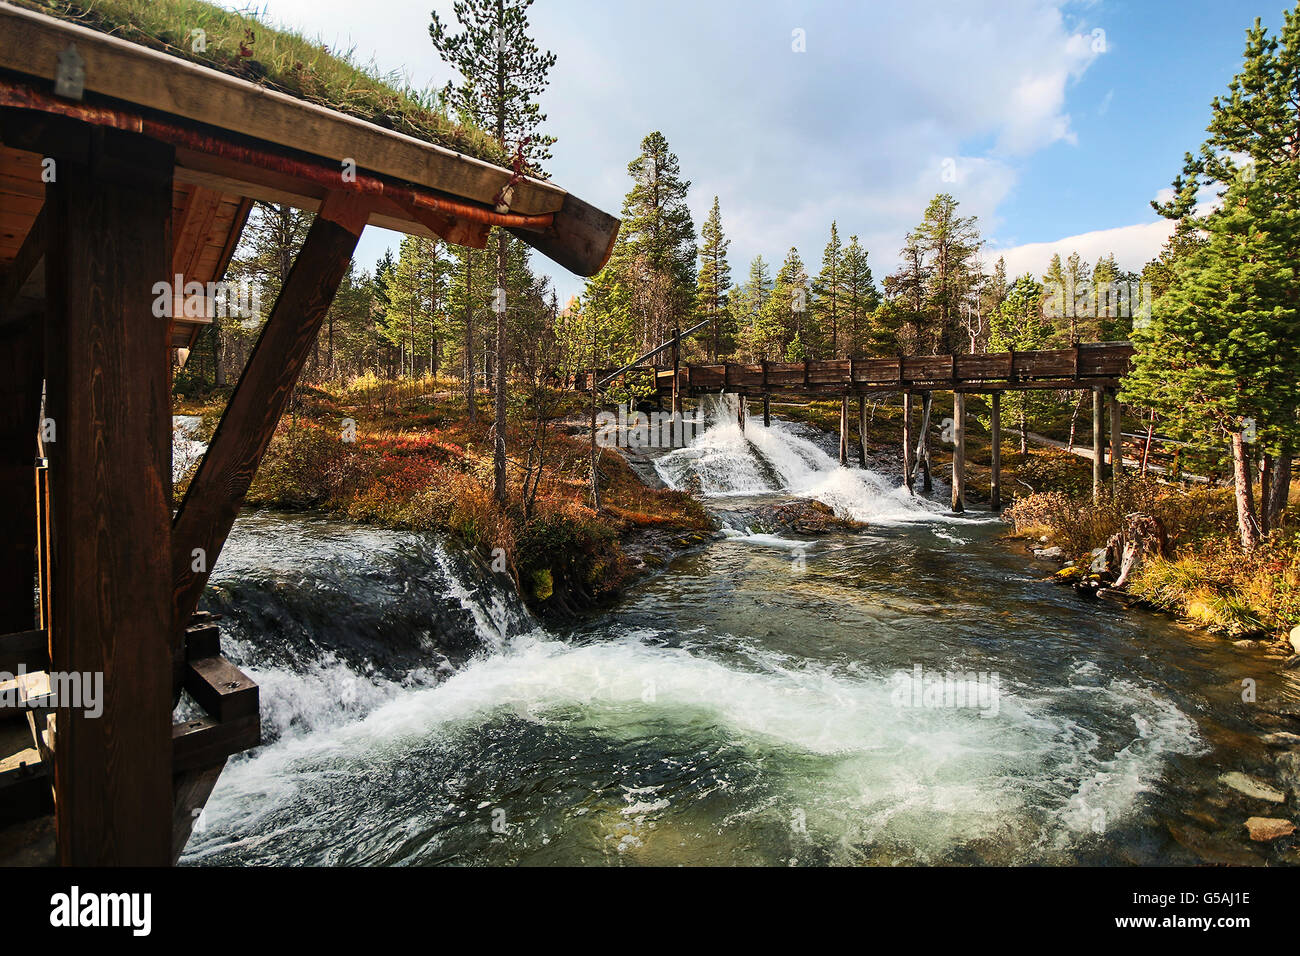 Shot at Sagelva Open Air Museum, Bjorli, Norway documenting traditional, local use of hydropower. Stock Photo